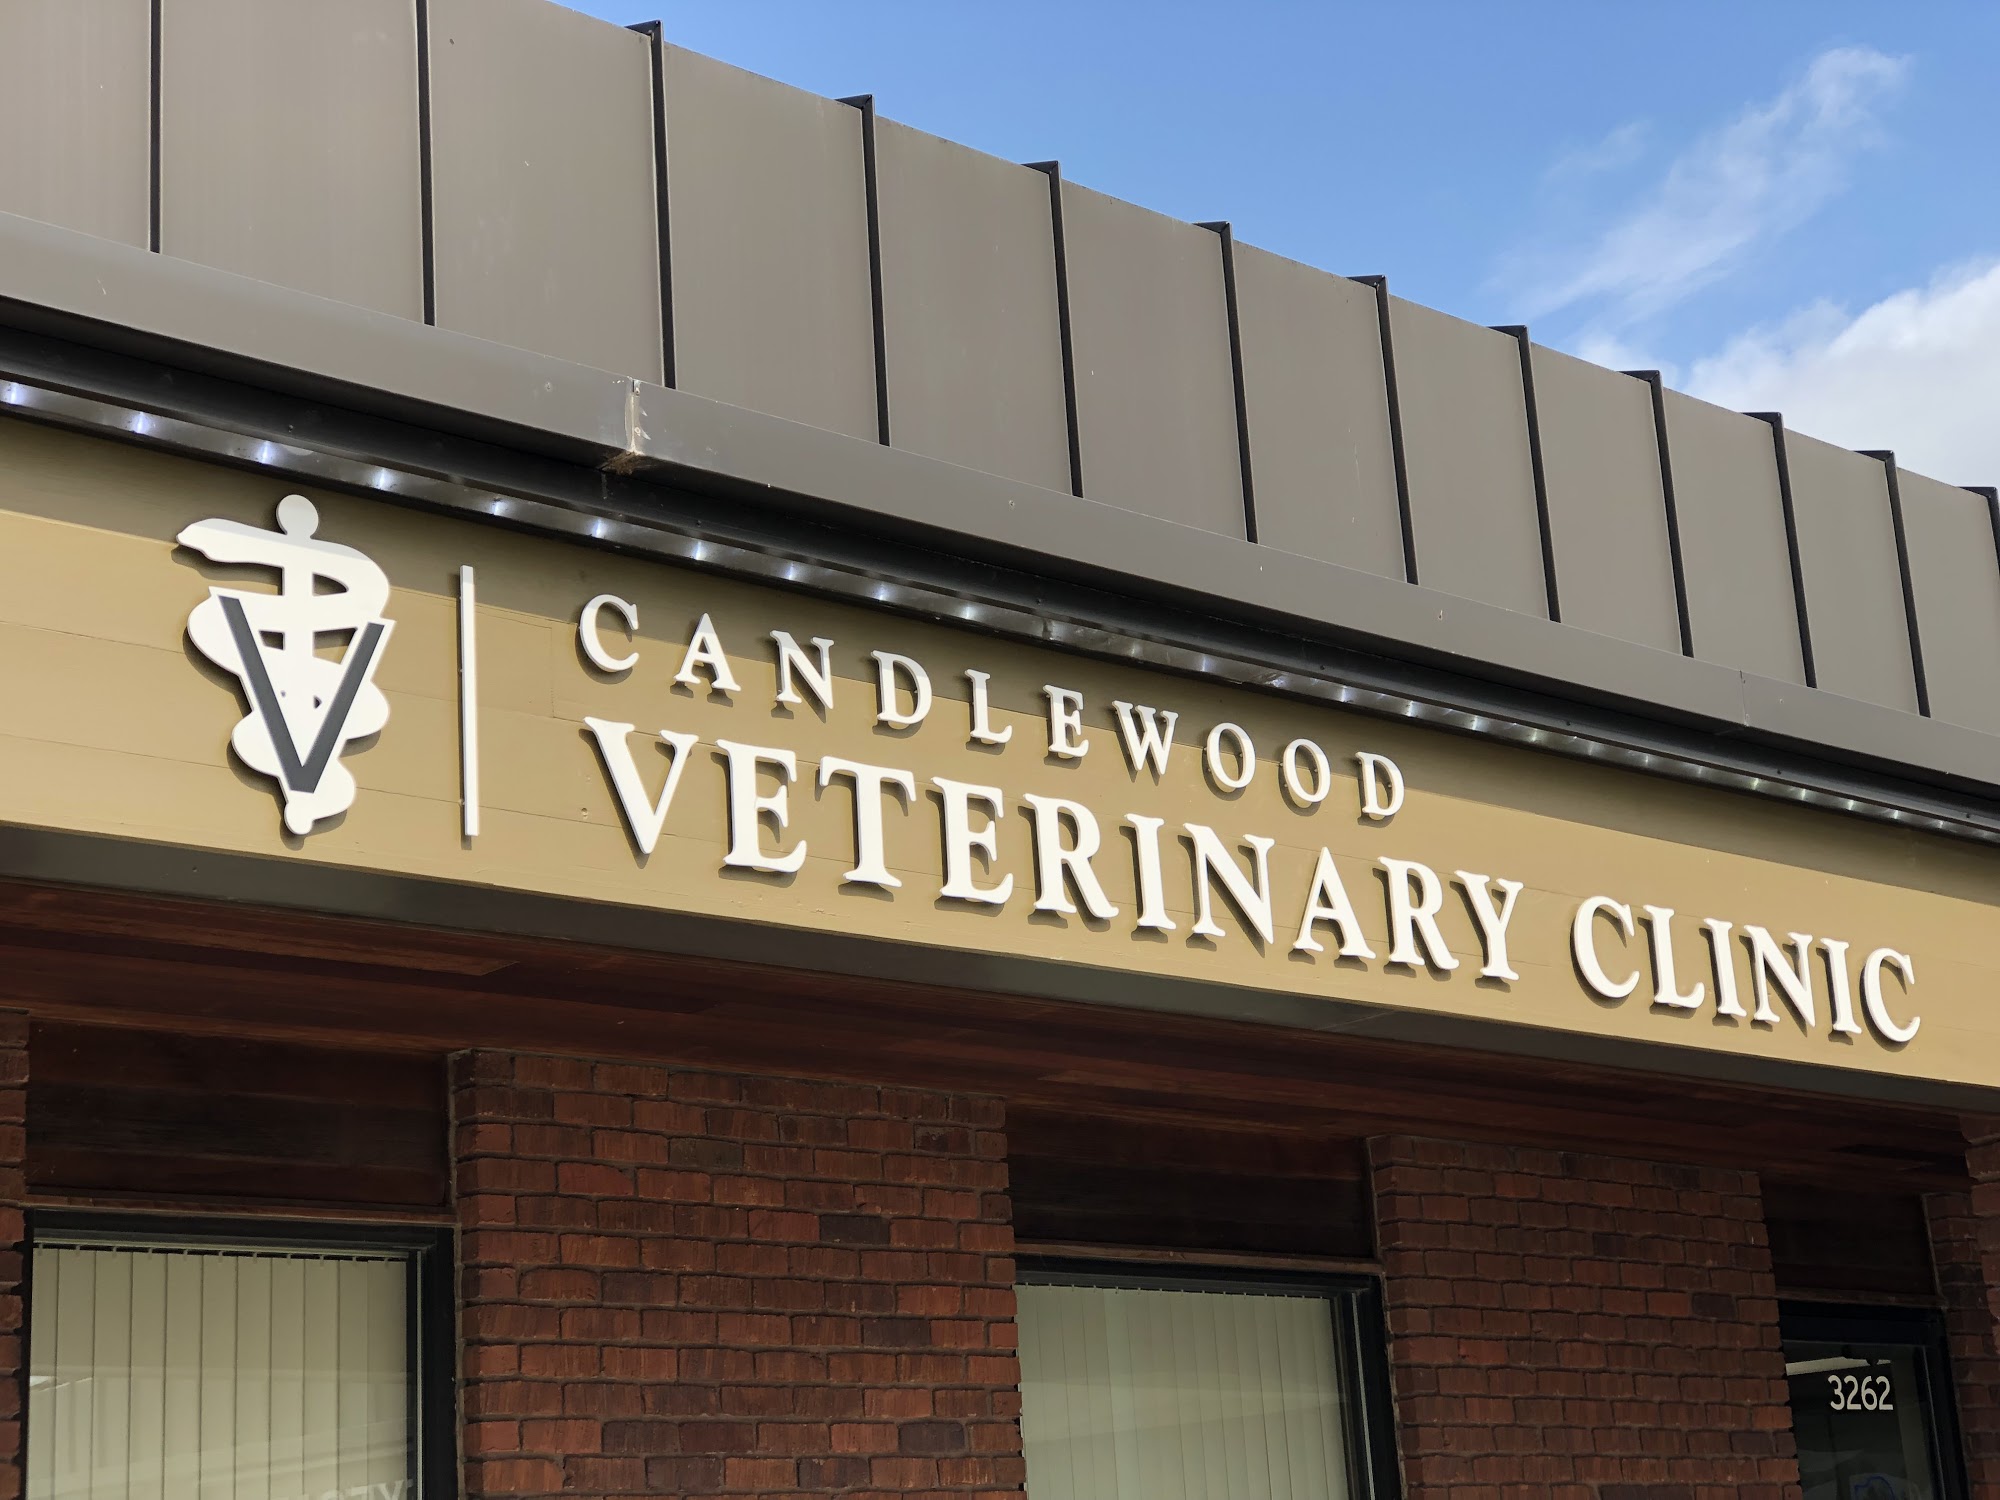 Candlewood Veterinary Clinic